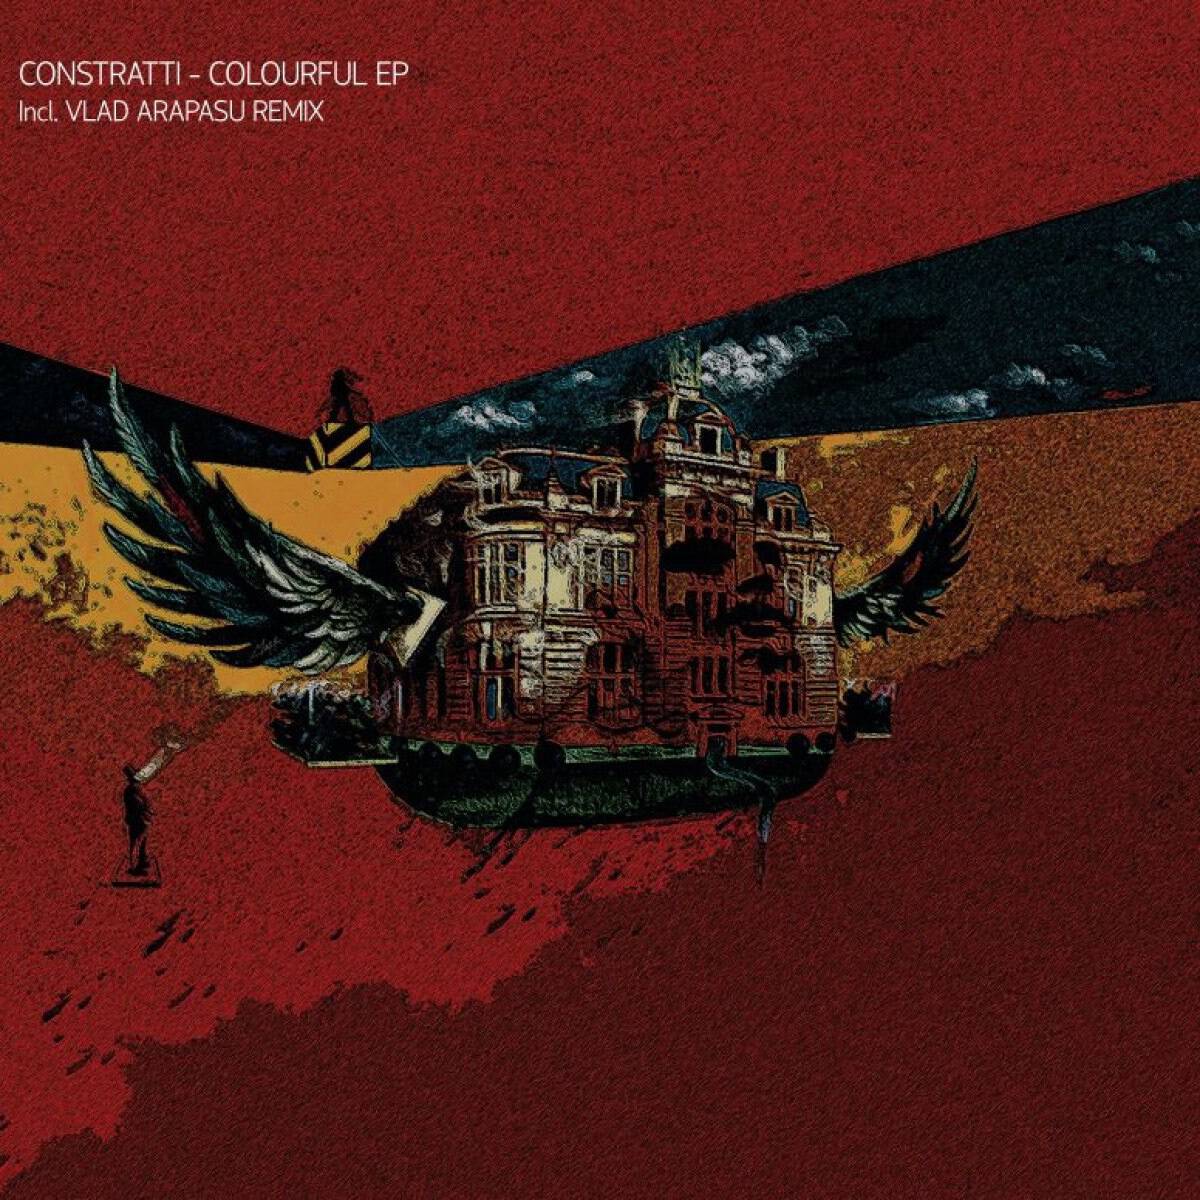 Download Constratti - Colourful EP on Electrobuzz